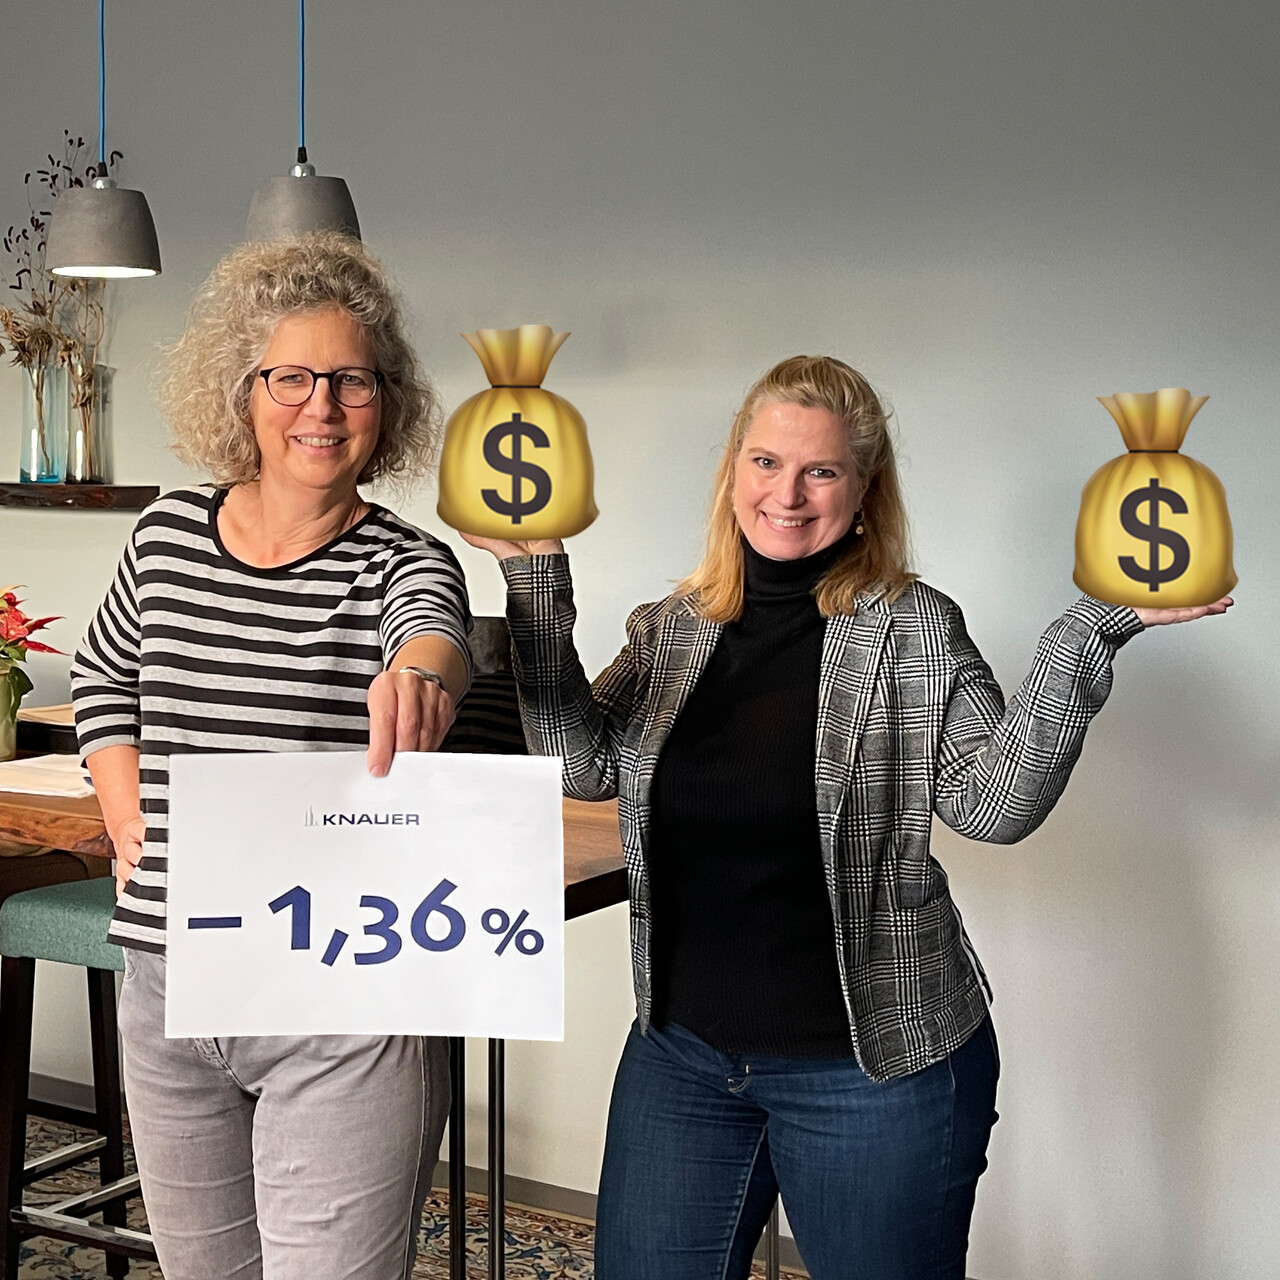 Satisfied faces among Managing Director Alexandra Knauer and Equal Opportunity Officer Katharina Pohl about the minimal gender pay gap